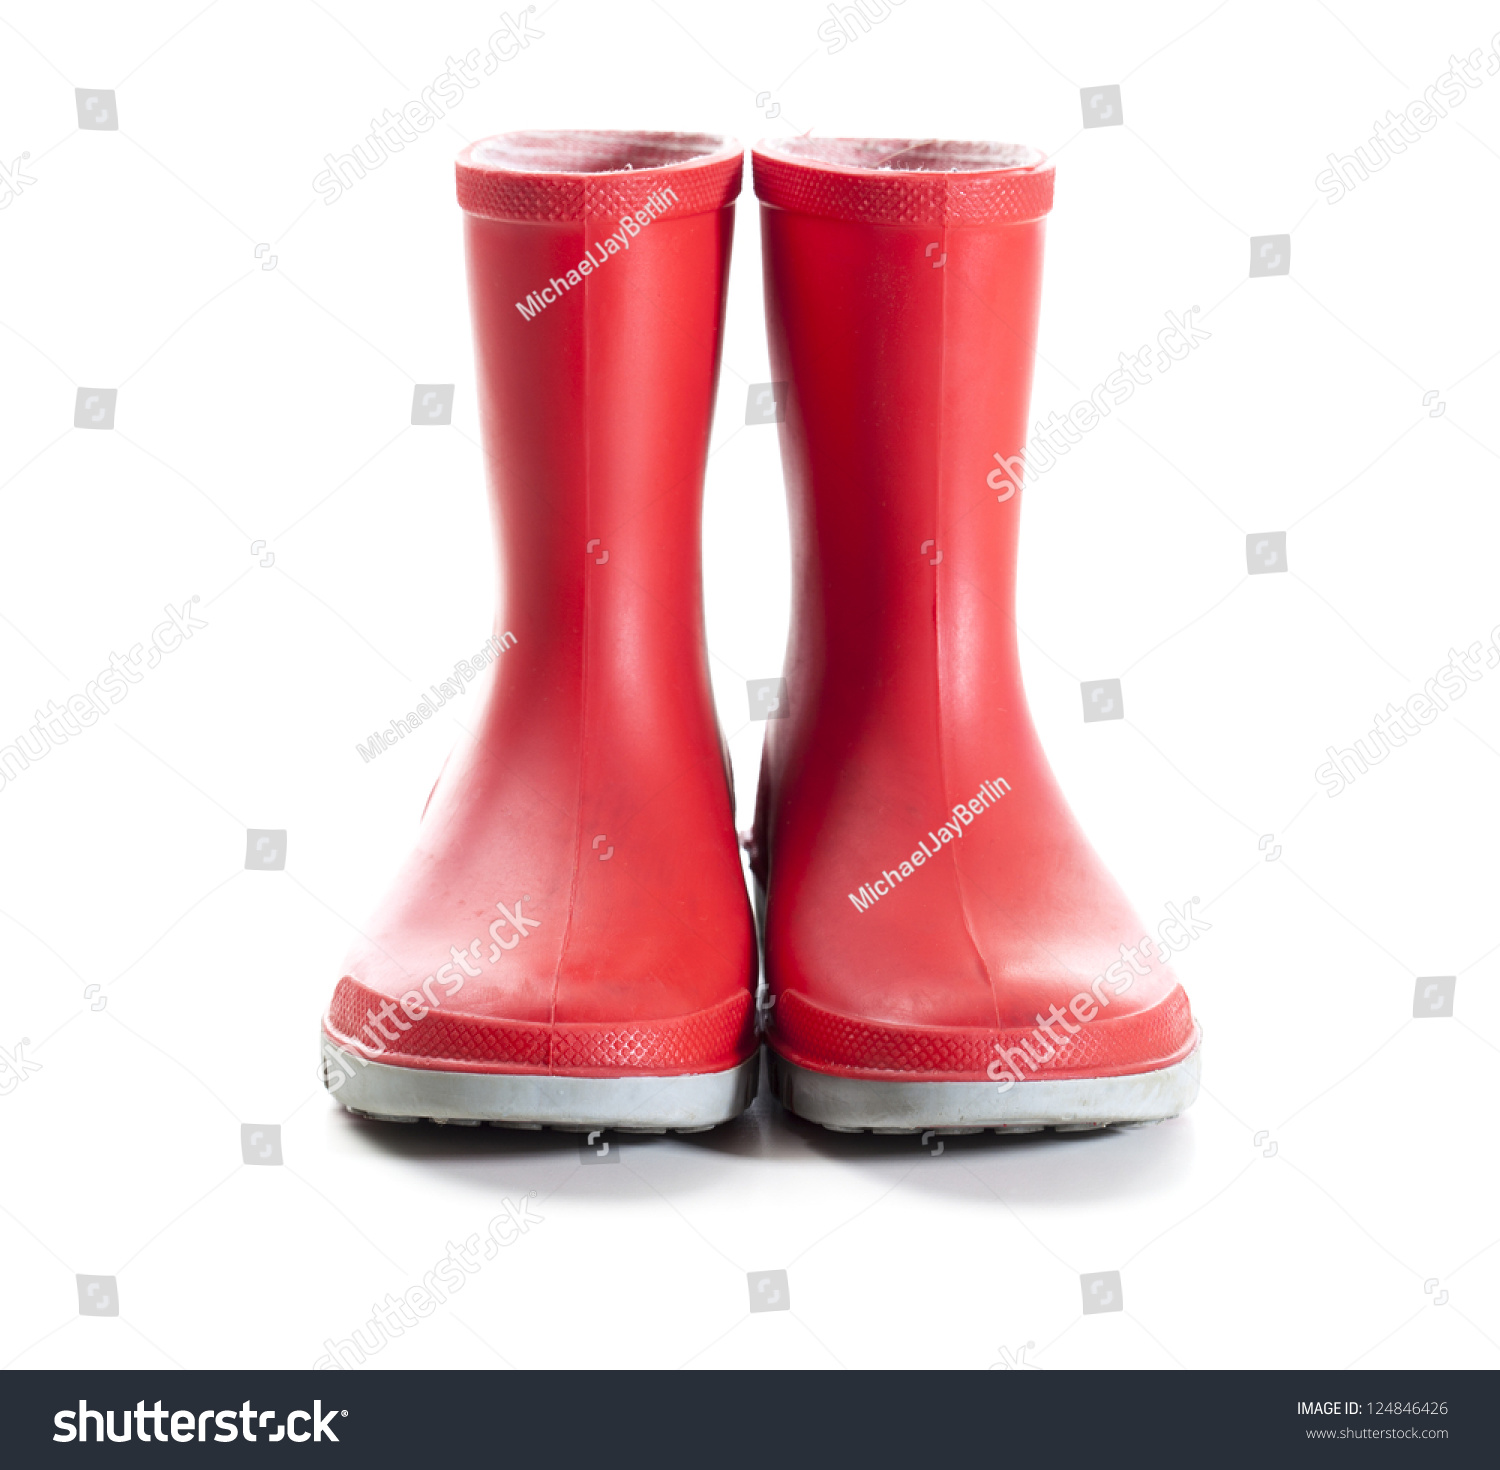 Pair Of Red Wellies In Kids Size. Front View. Studio Shot, Isolated On ...